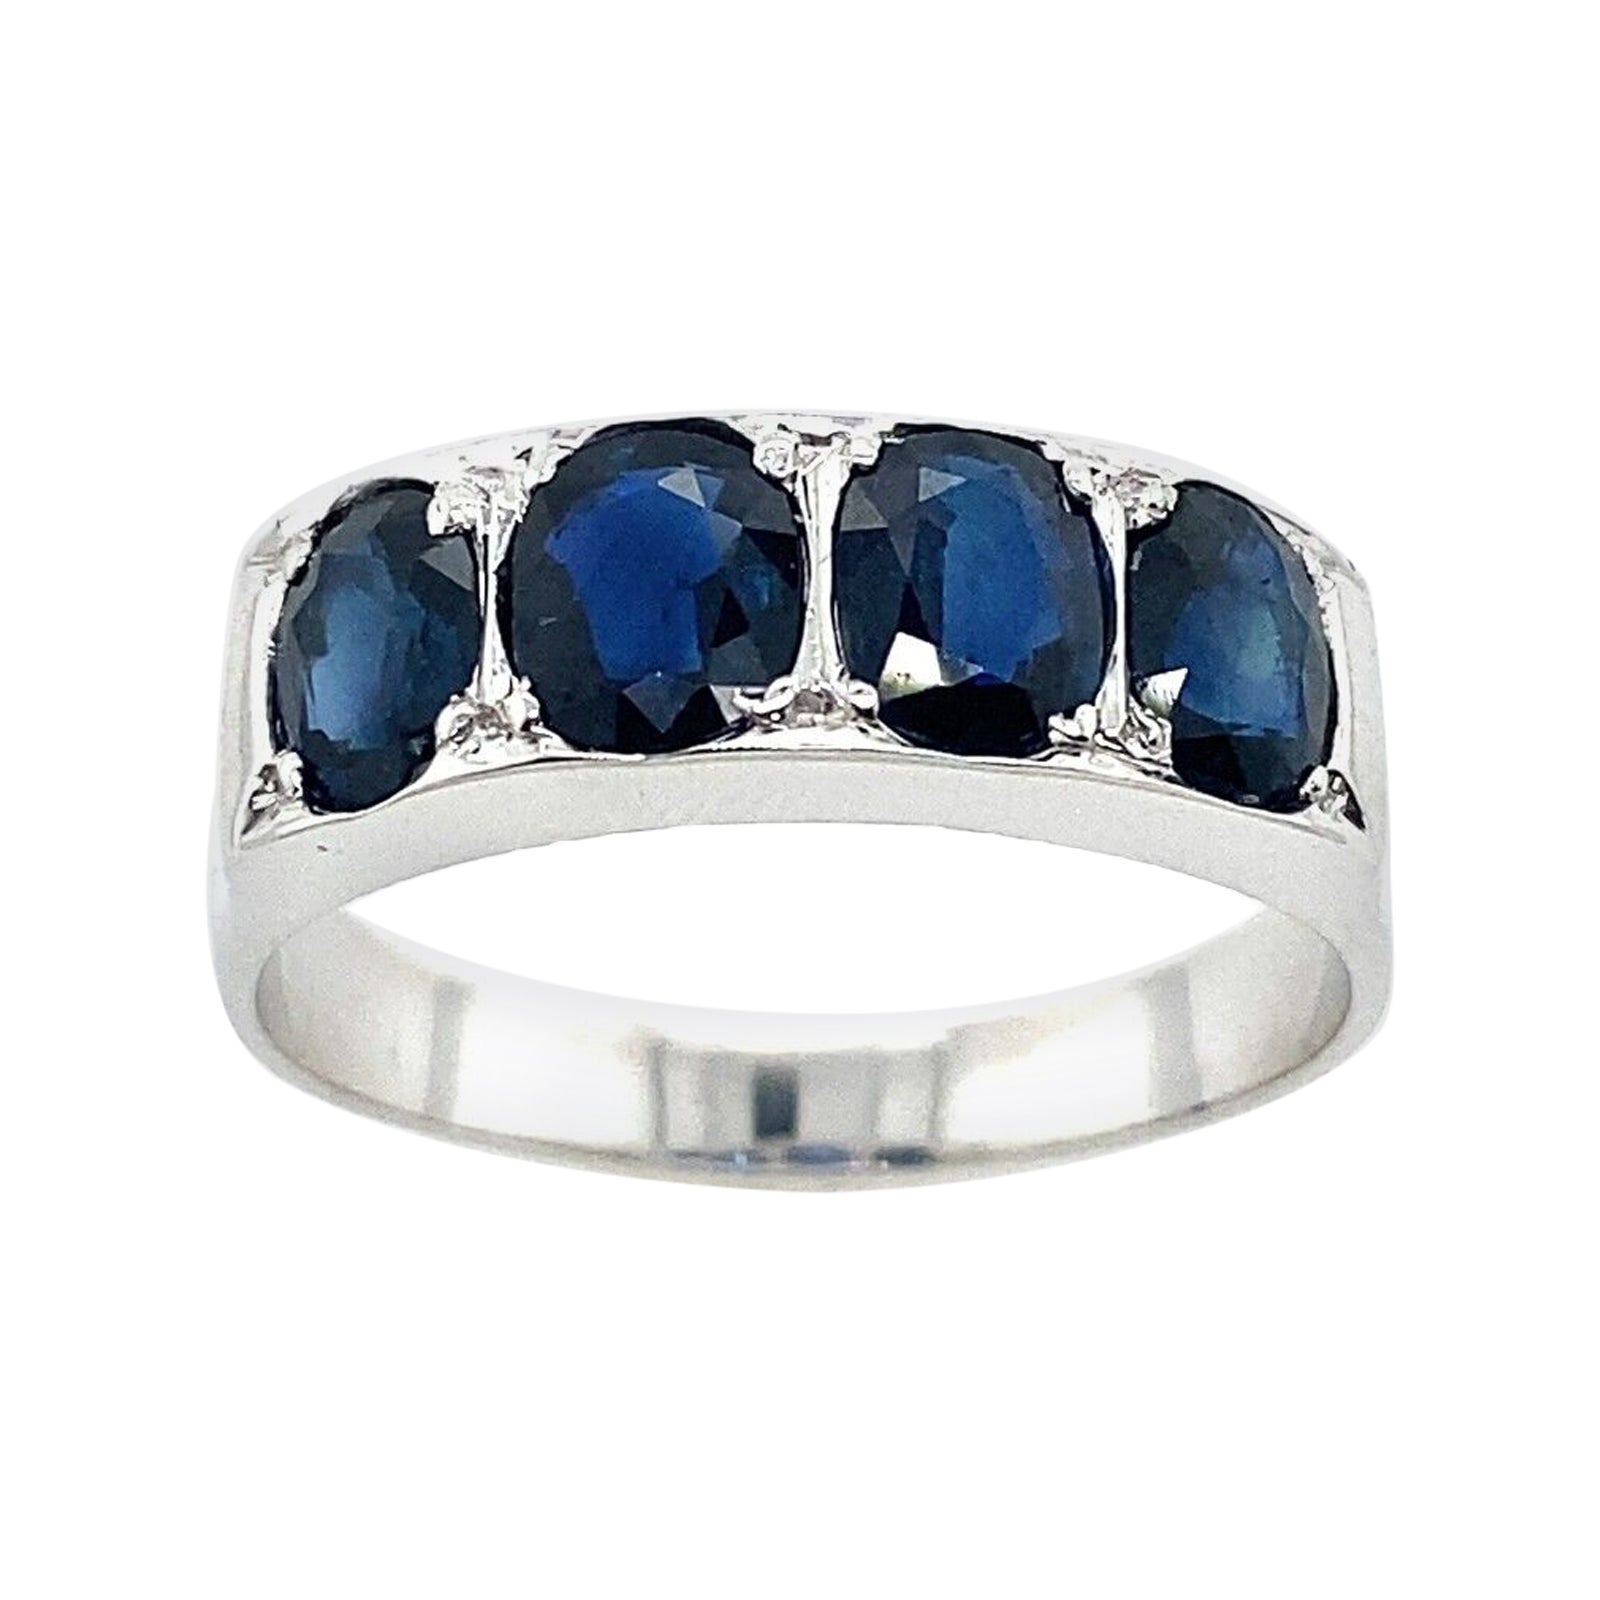 Vintage 5-Sone Oval Sapphire Ring Set in 8ct White Gold For Sale